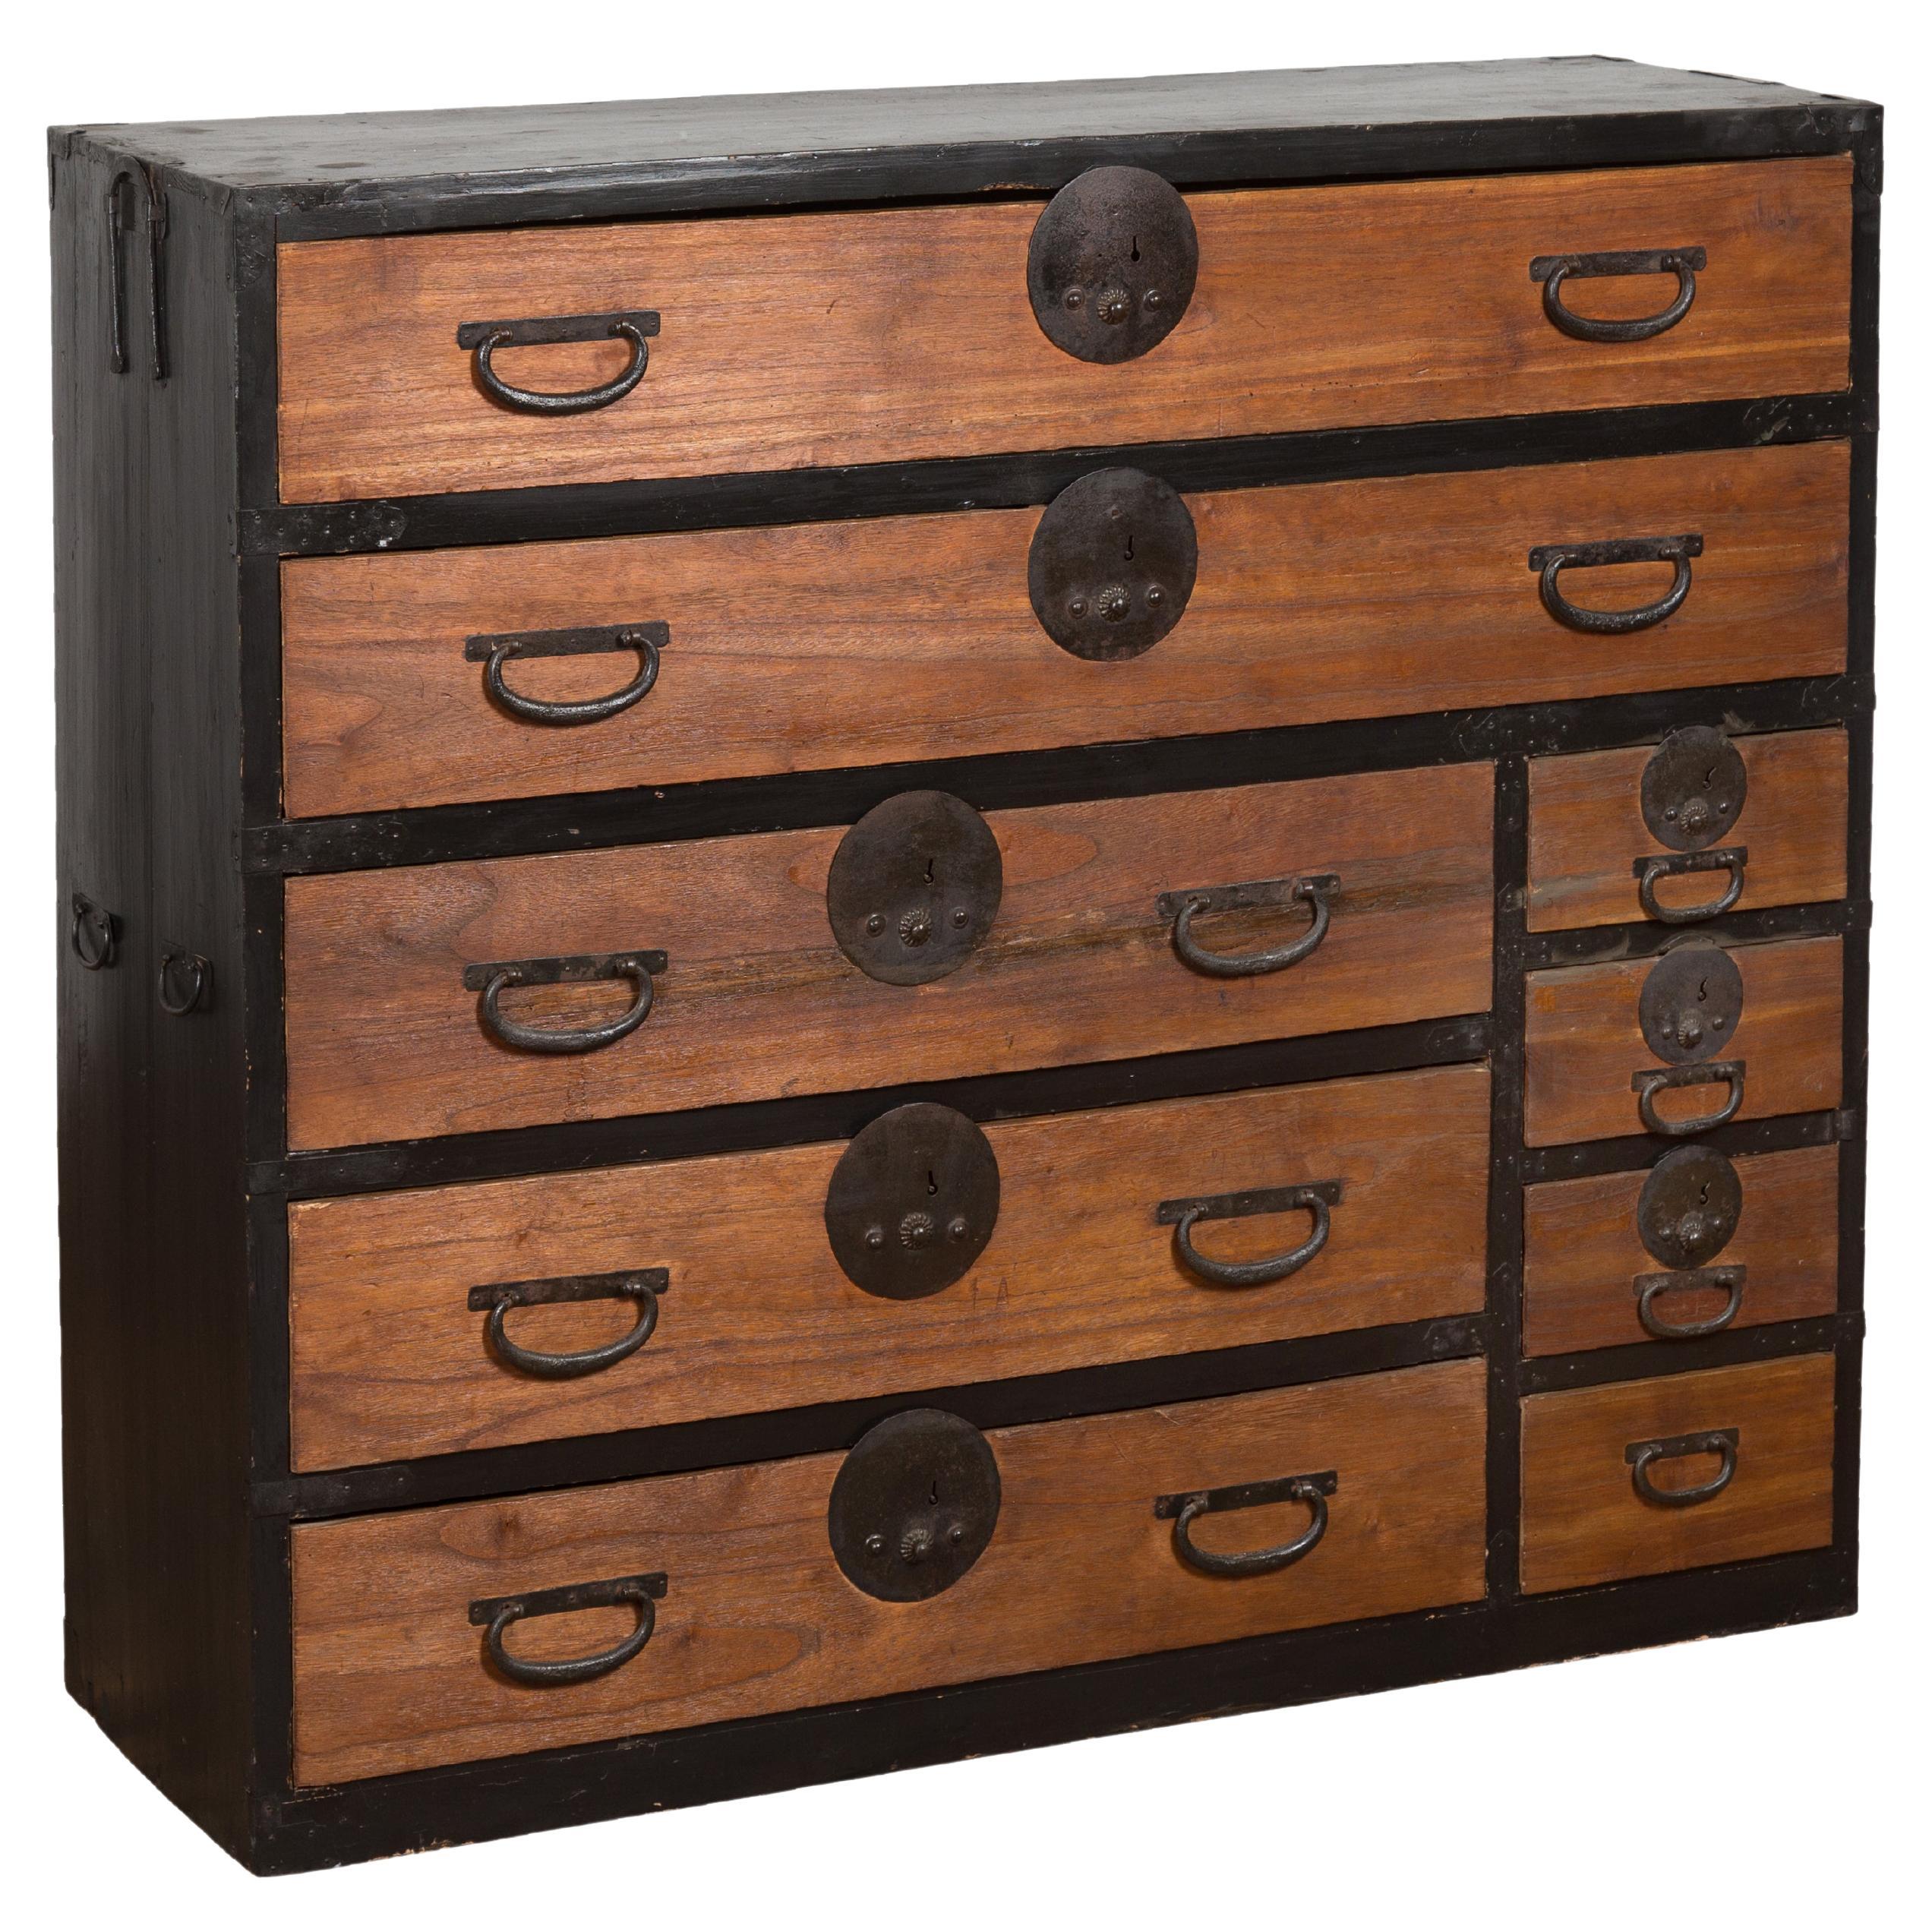 Japanese Meiji Period 19th Century Black and Brown Tansu Chest with Nine Drawers